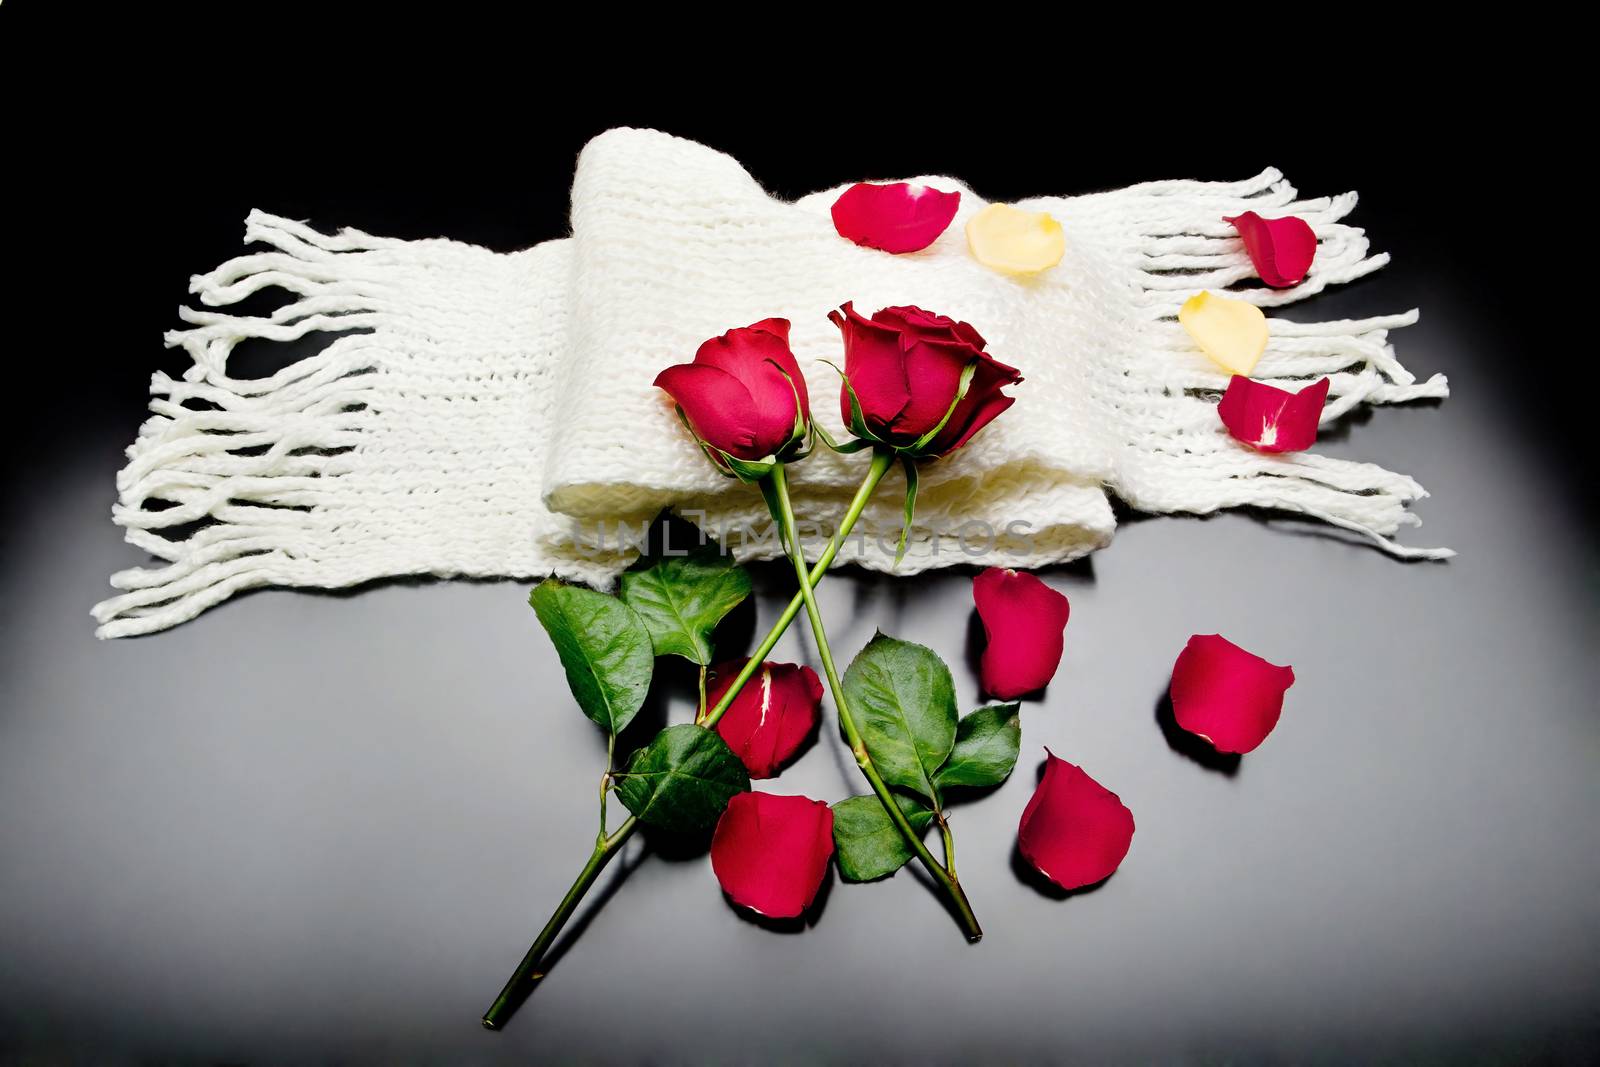 two red roses together with red petals on a black background by Ainat